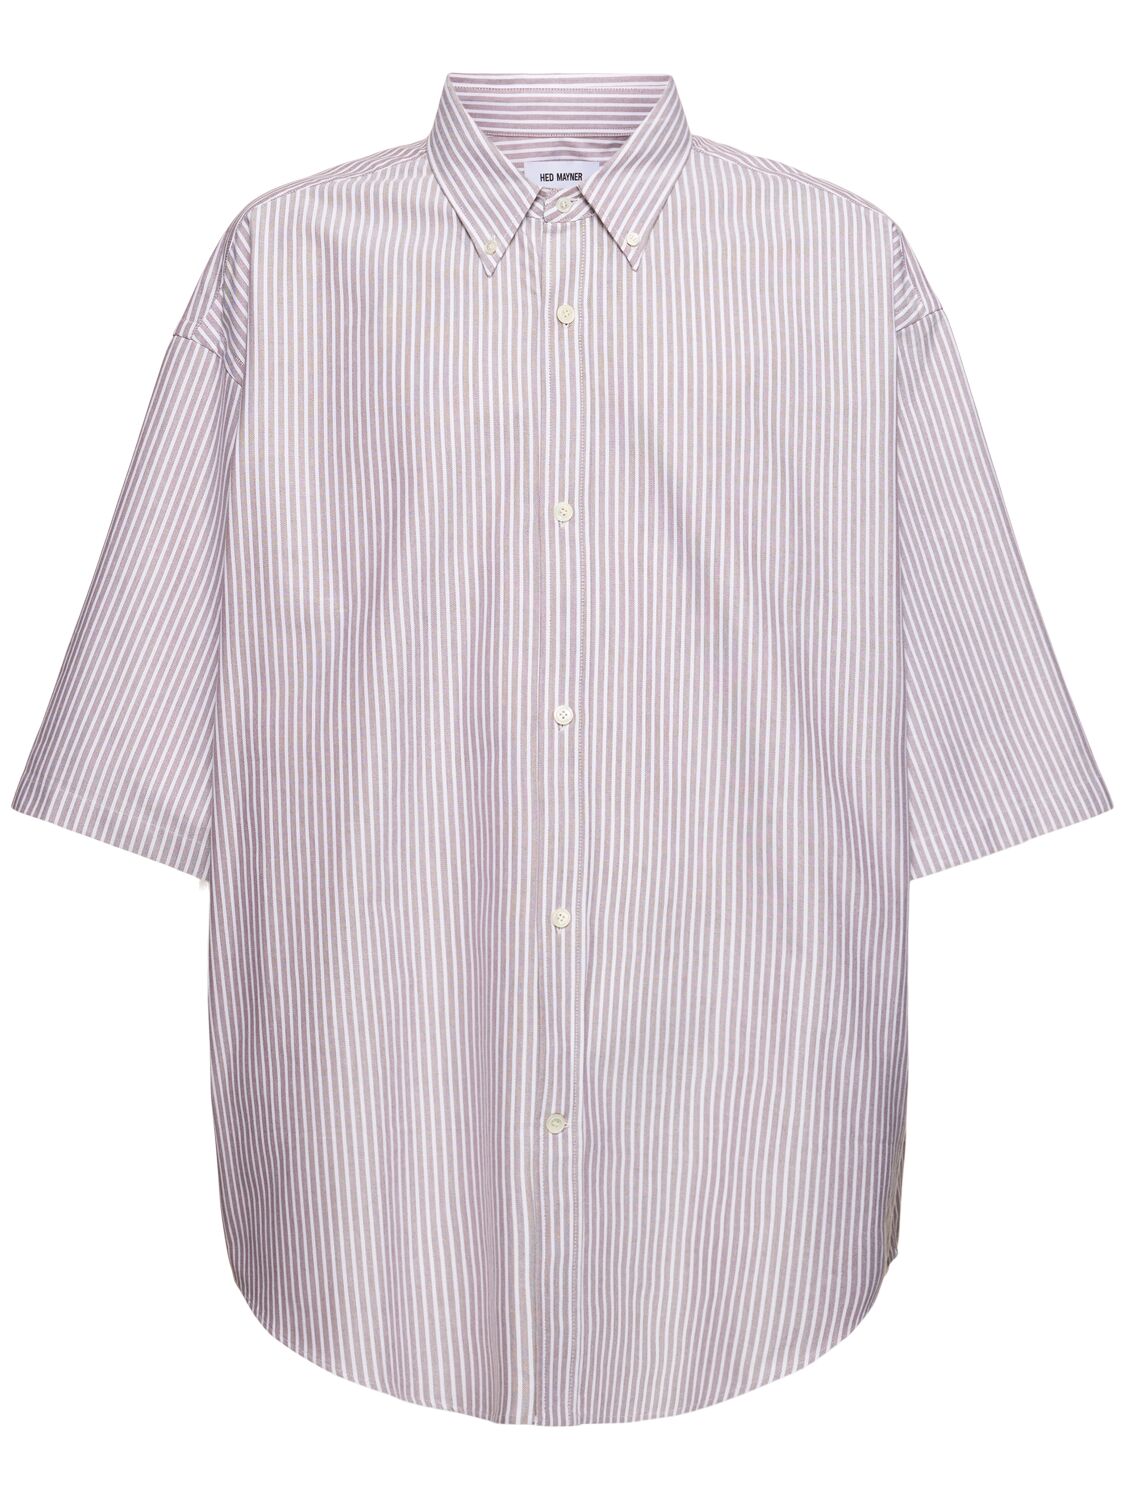 Image of Pinstriped Heavy Cotton Shirt